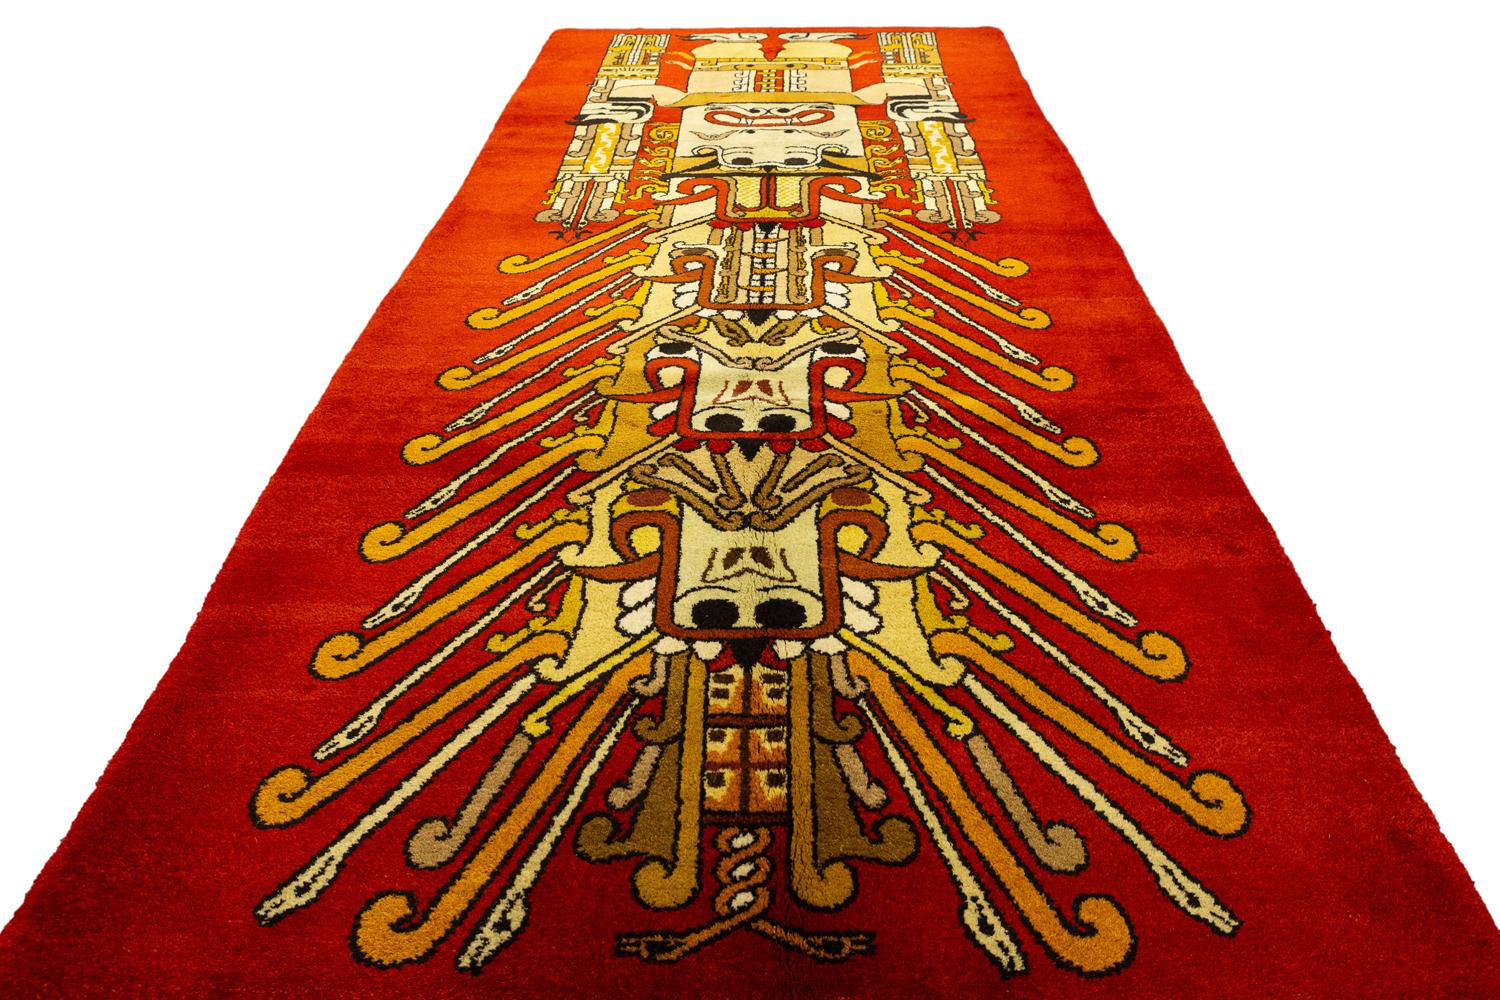 Hand-Knotted European Rug with Mayan Culture Design, 1950-1970 For Sale